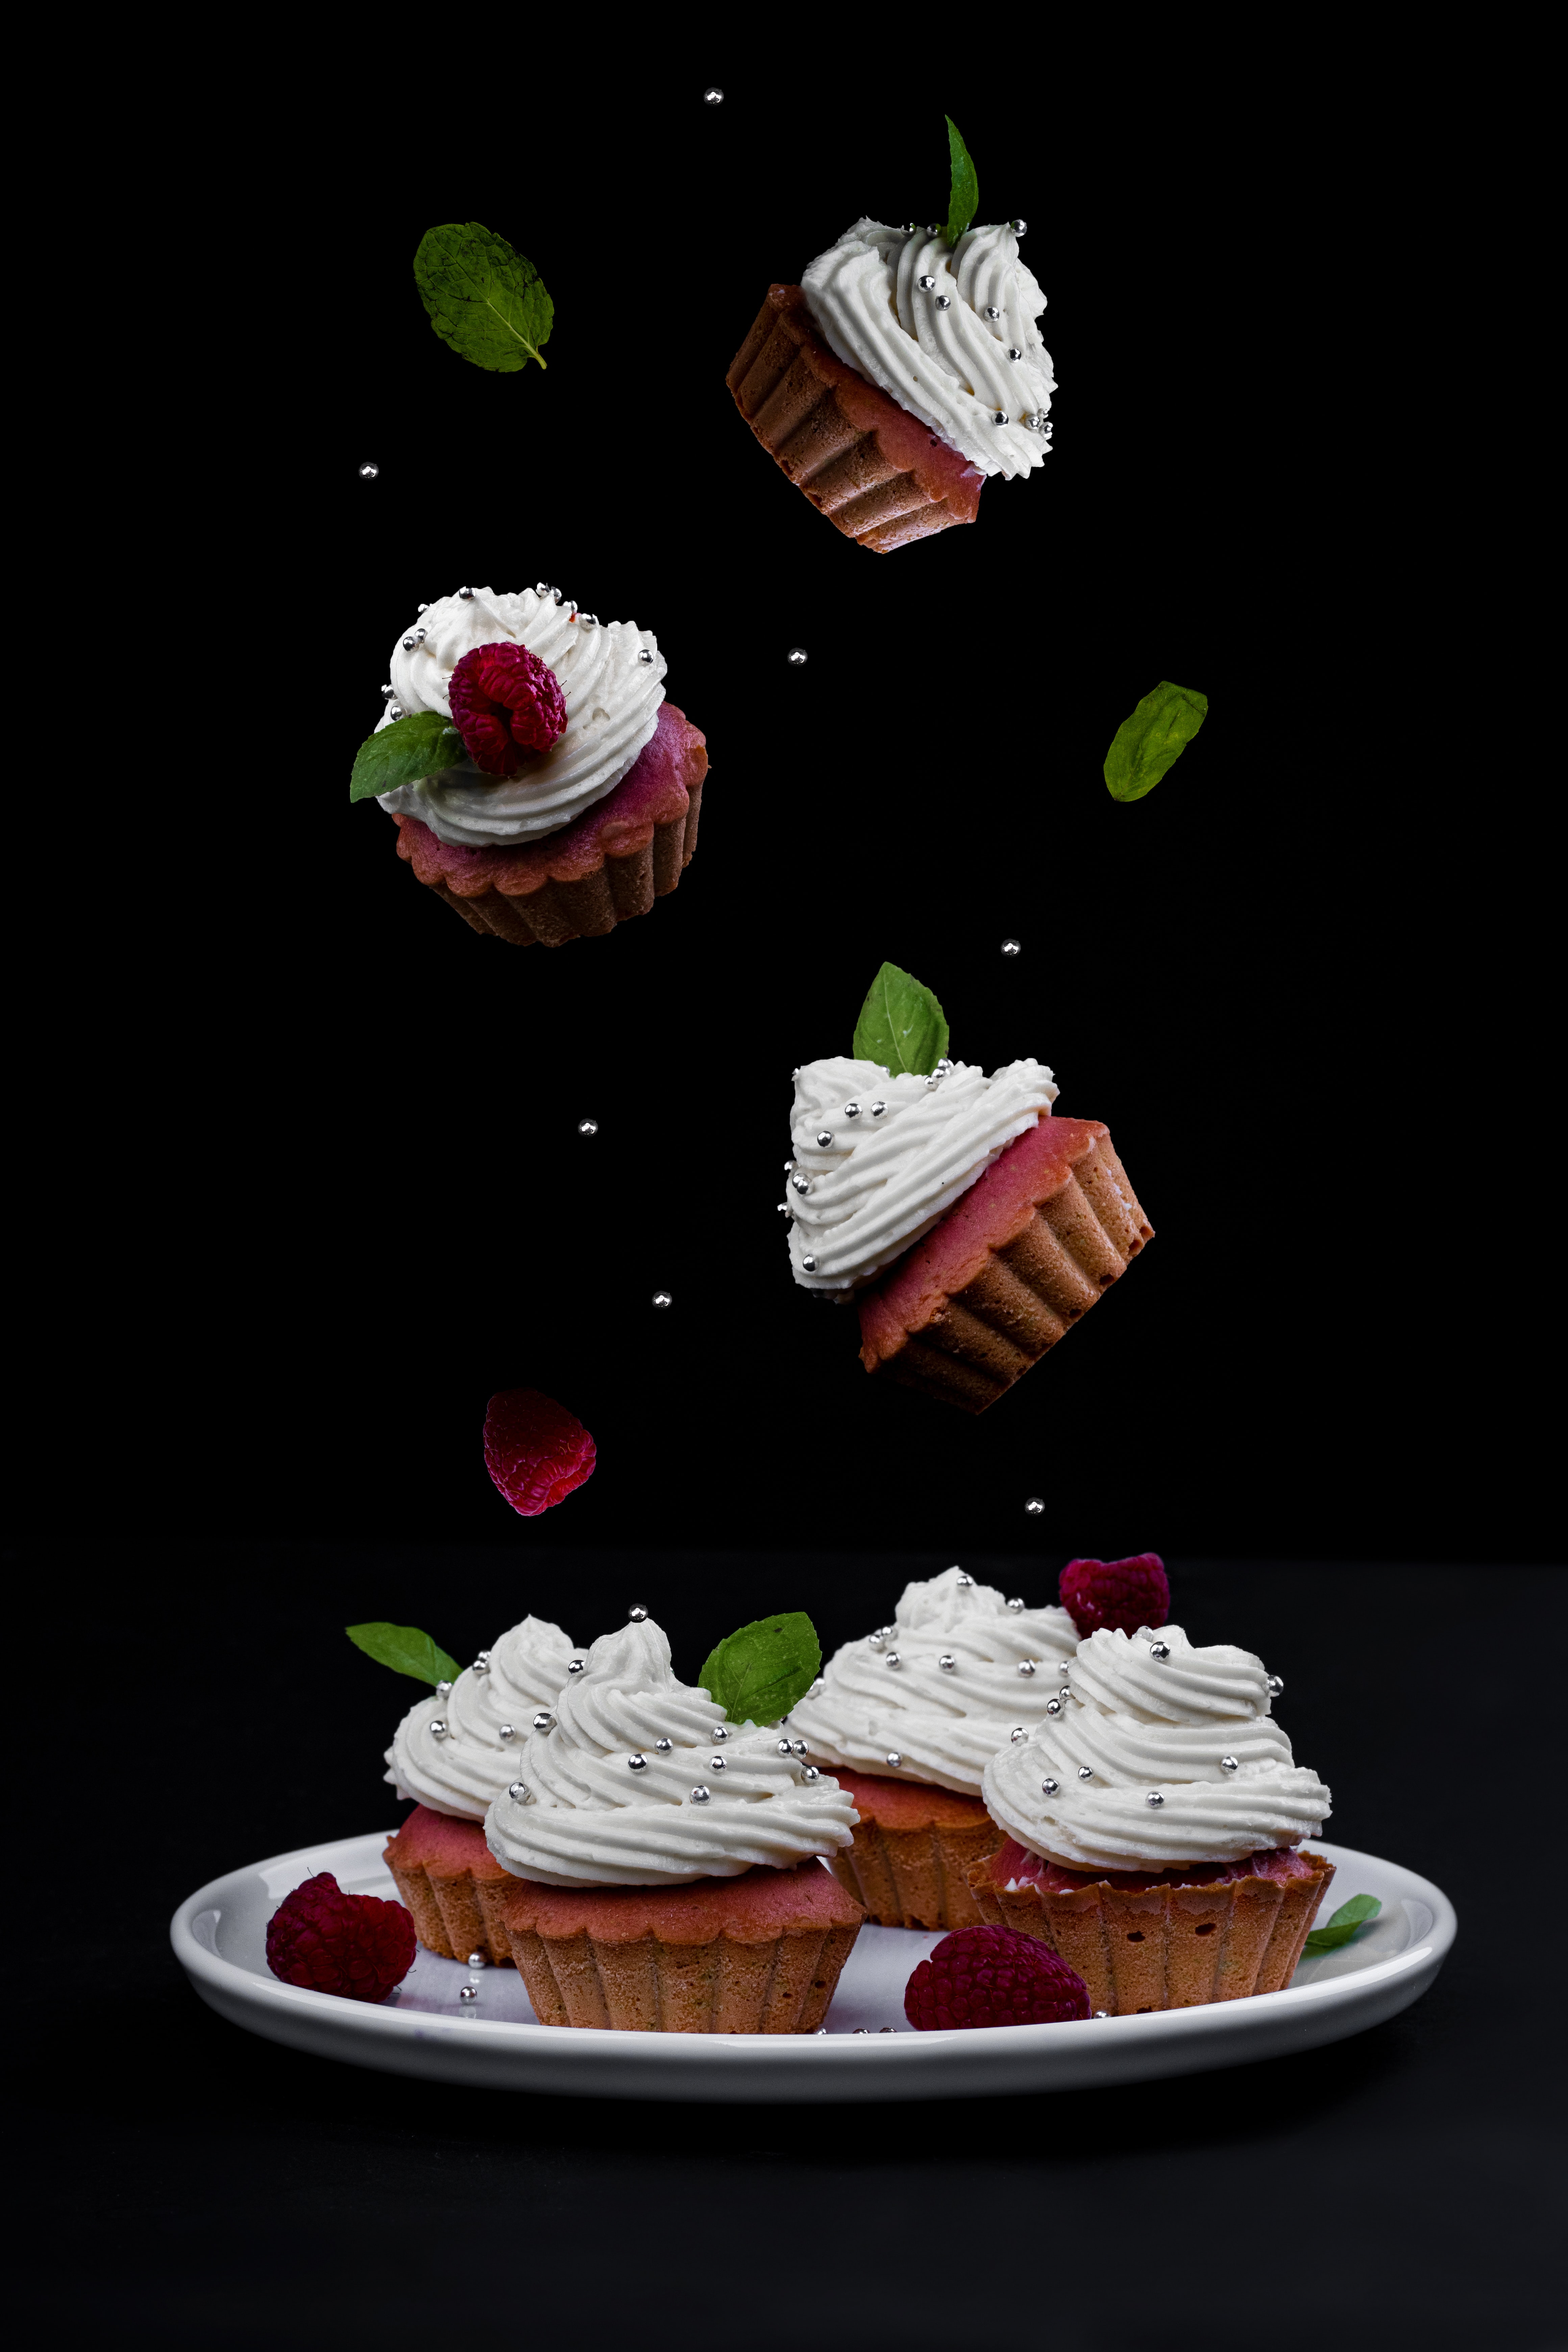 154003 Screensavers and Wallpapers Cream for phone. Download food, desert, berries, cream, plate, cupcakes, capskey pictures for free